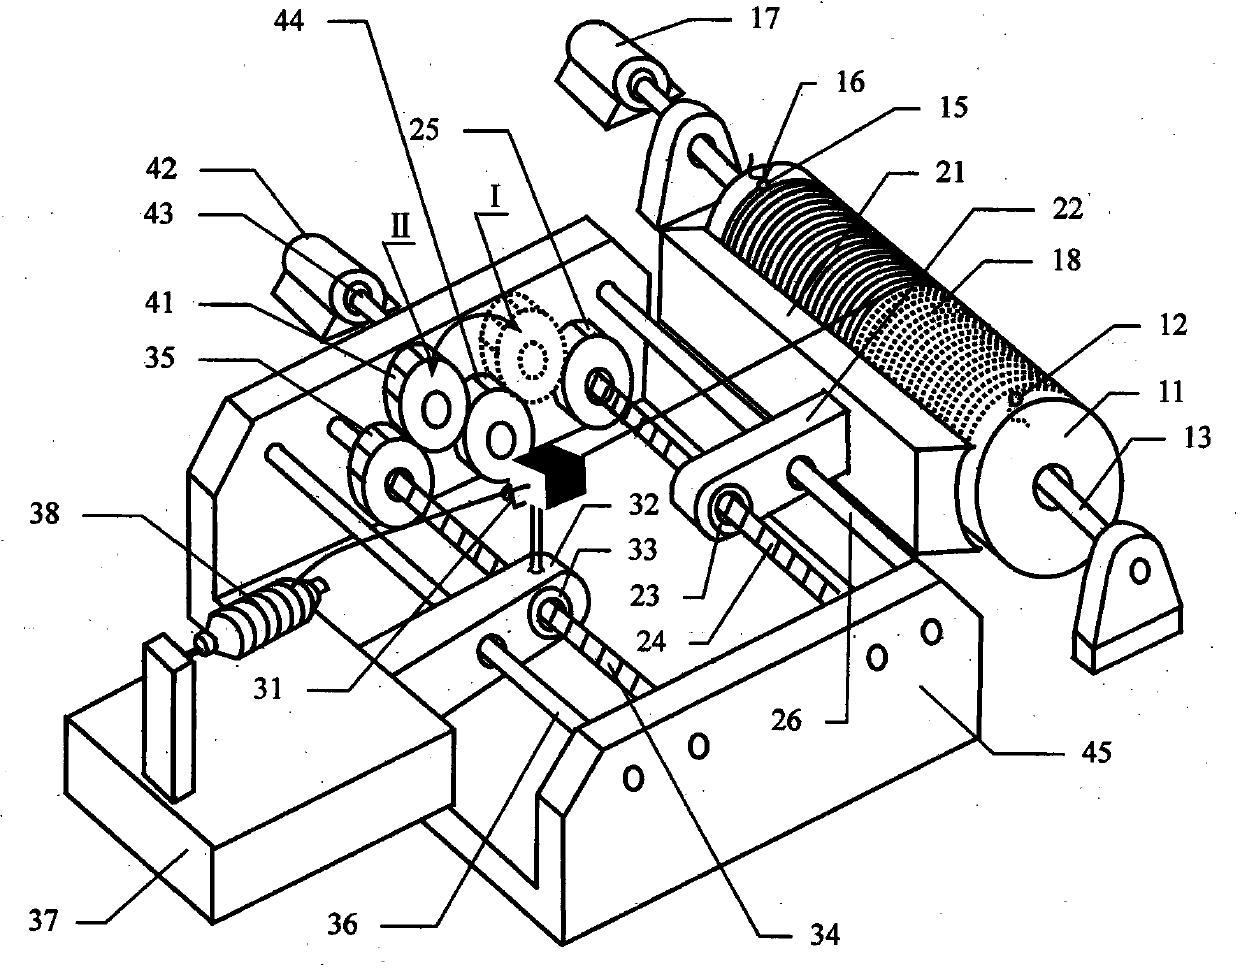 Device and method used for measuring pilling form and pulling force of yarns